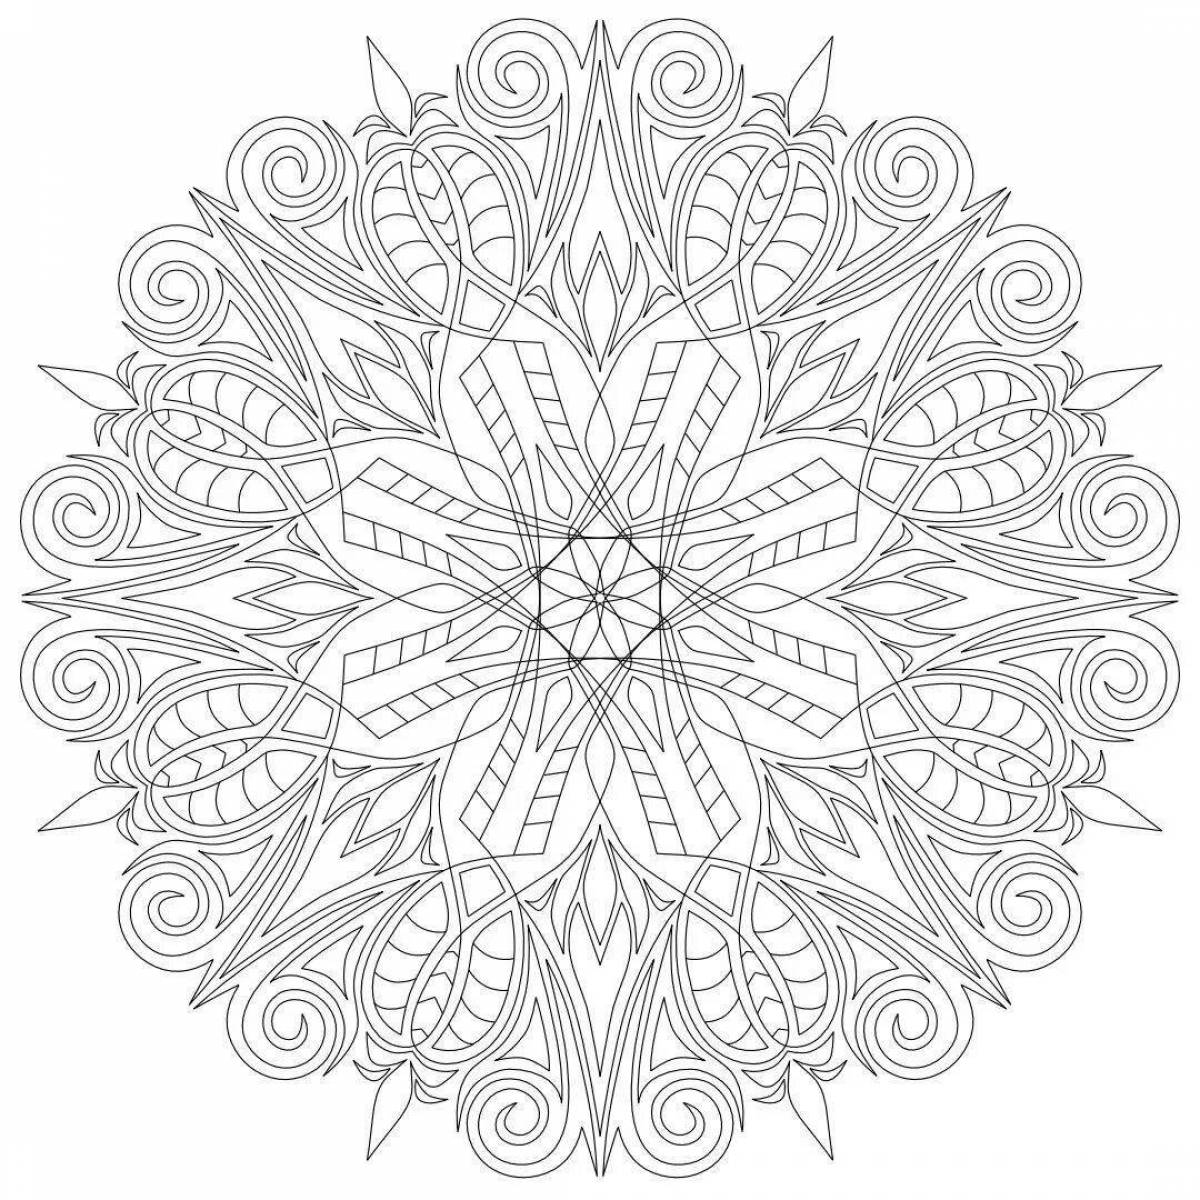 Adorable kaleidoscope coloring page